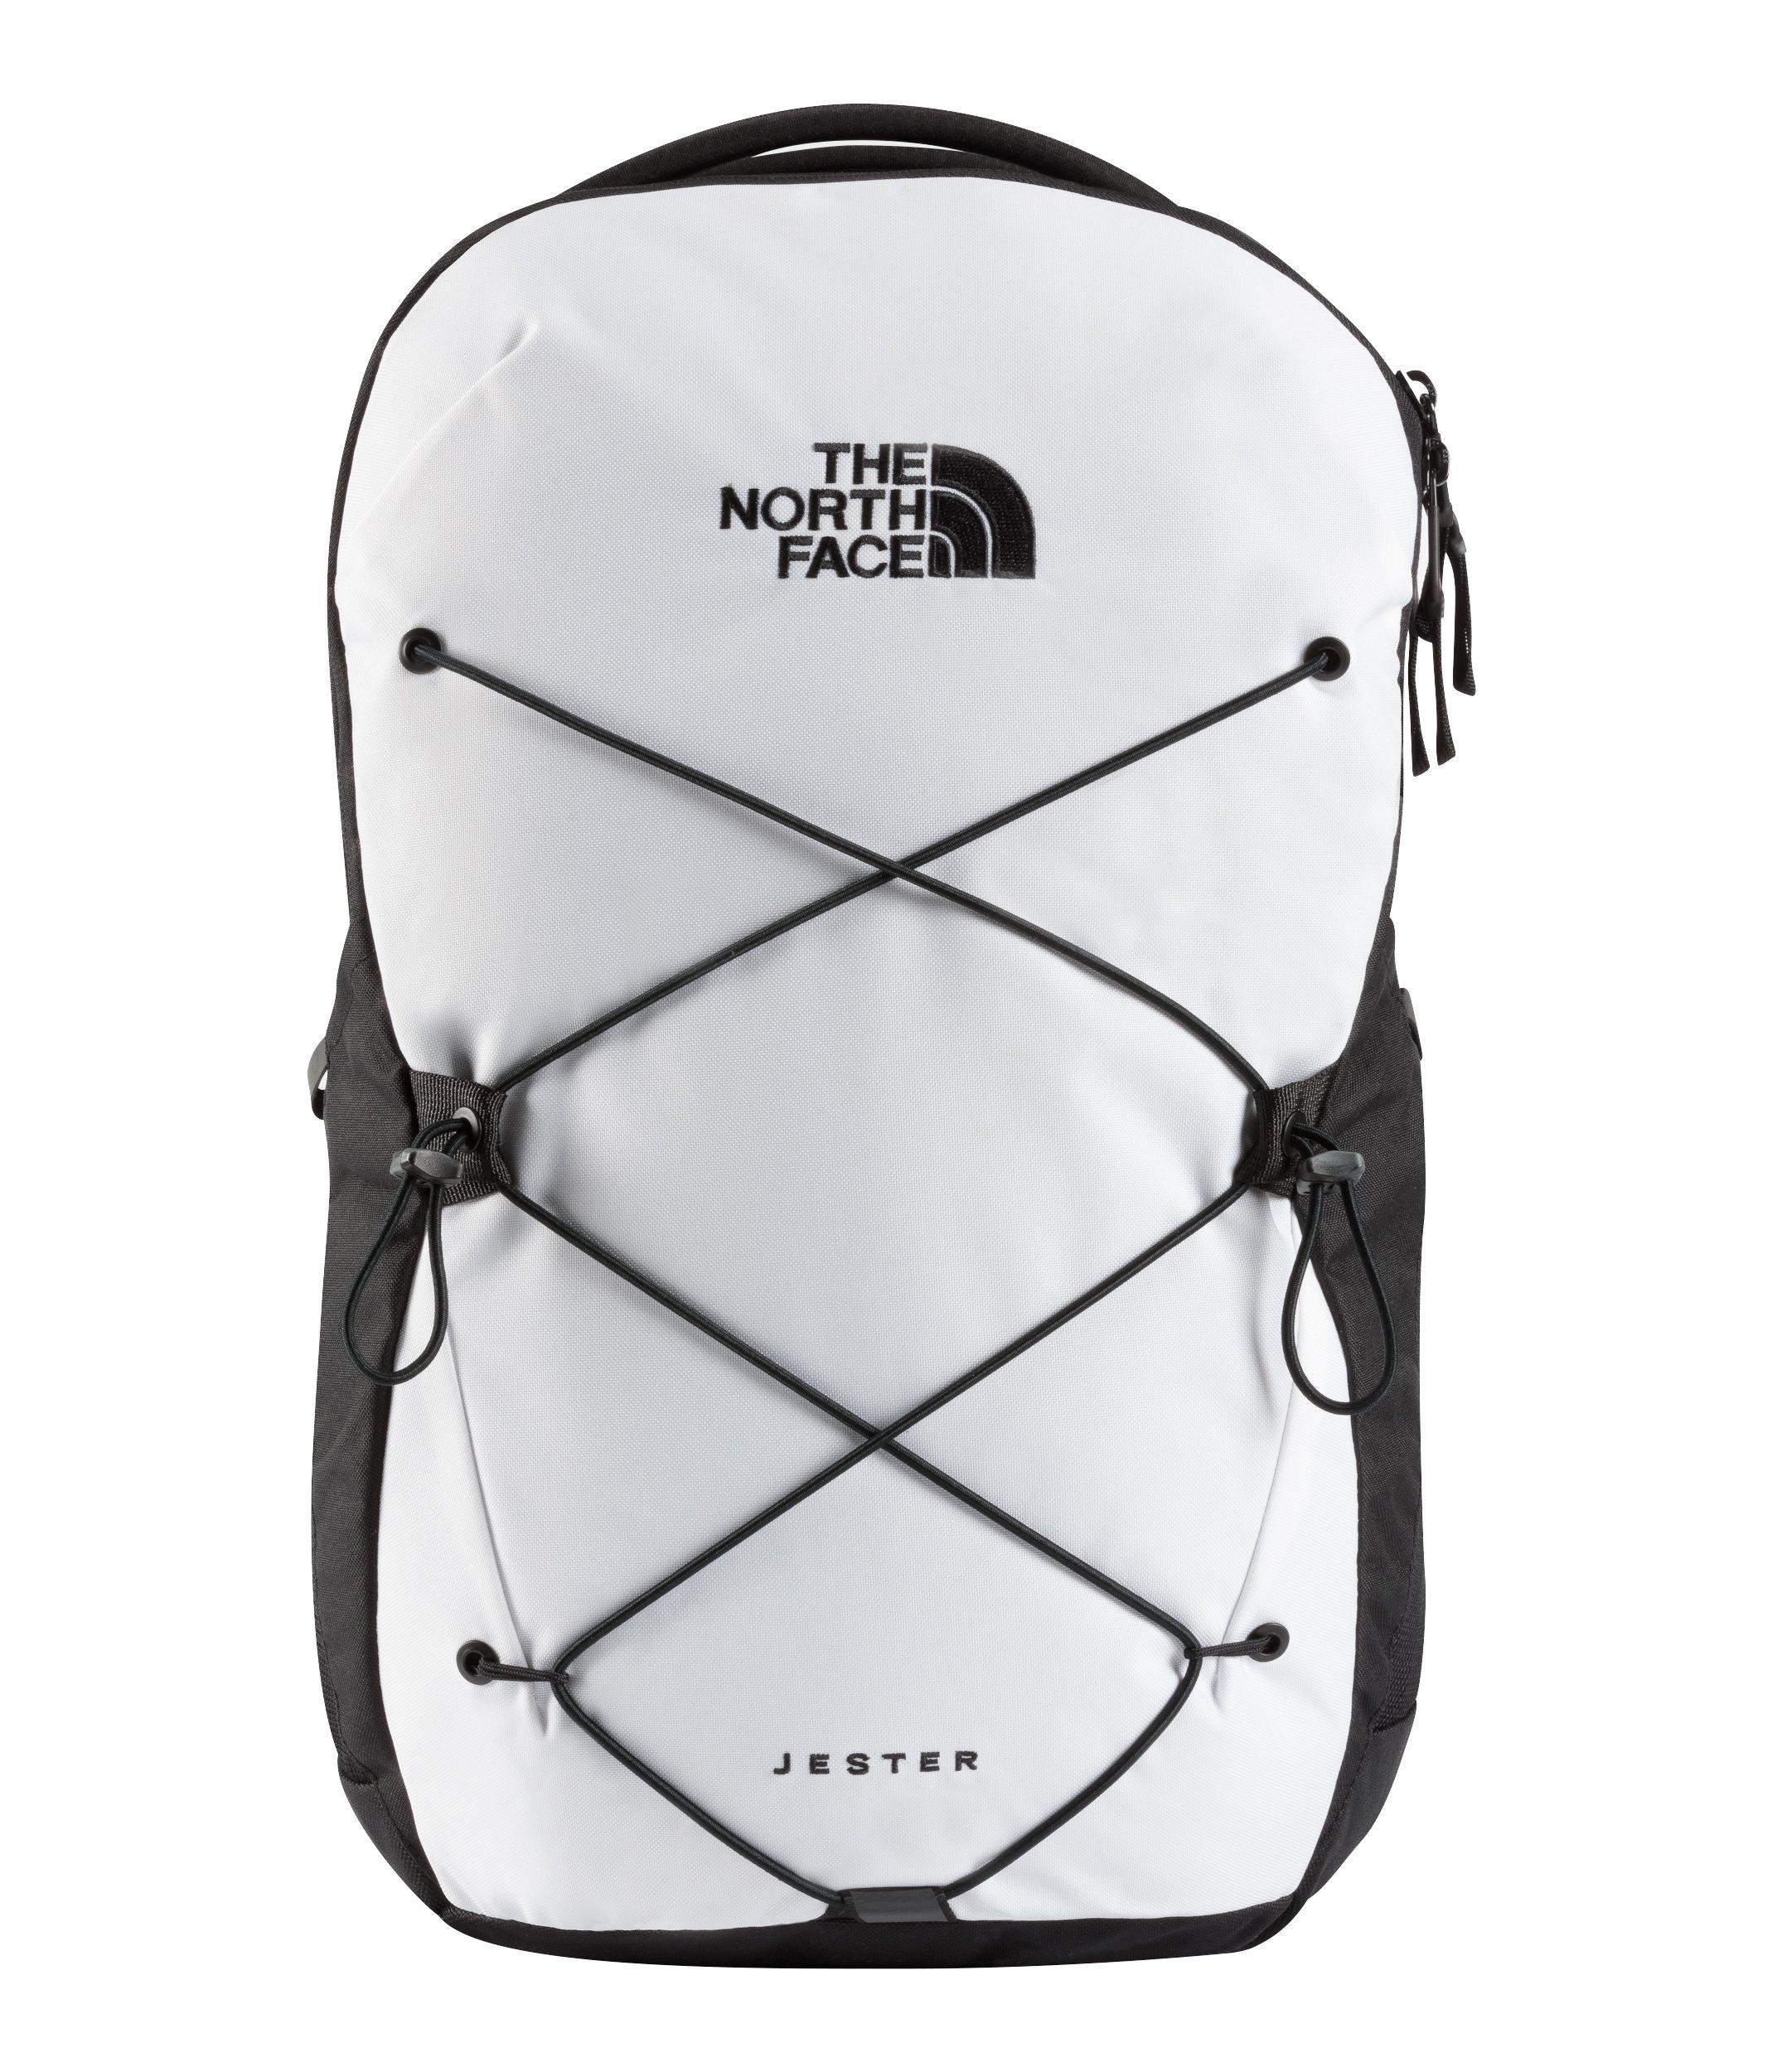 The North Face Jester Backpack-White 